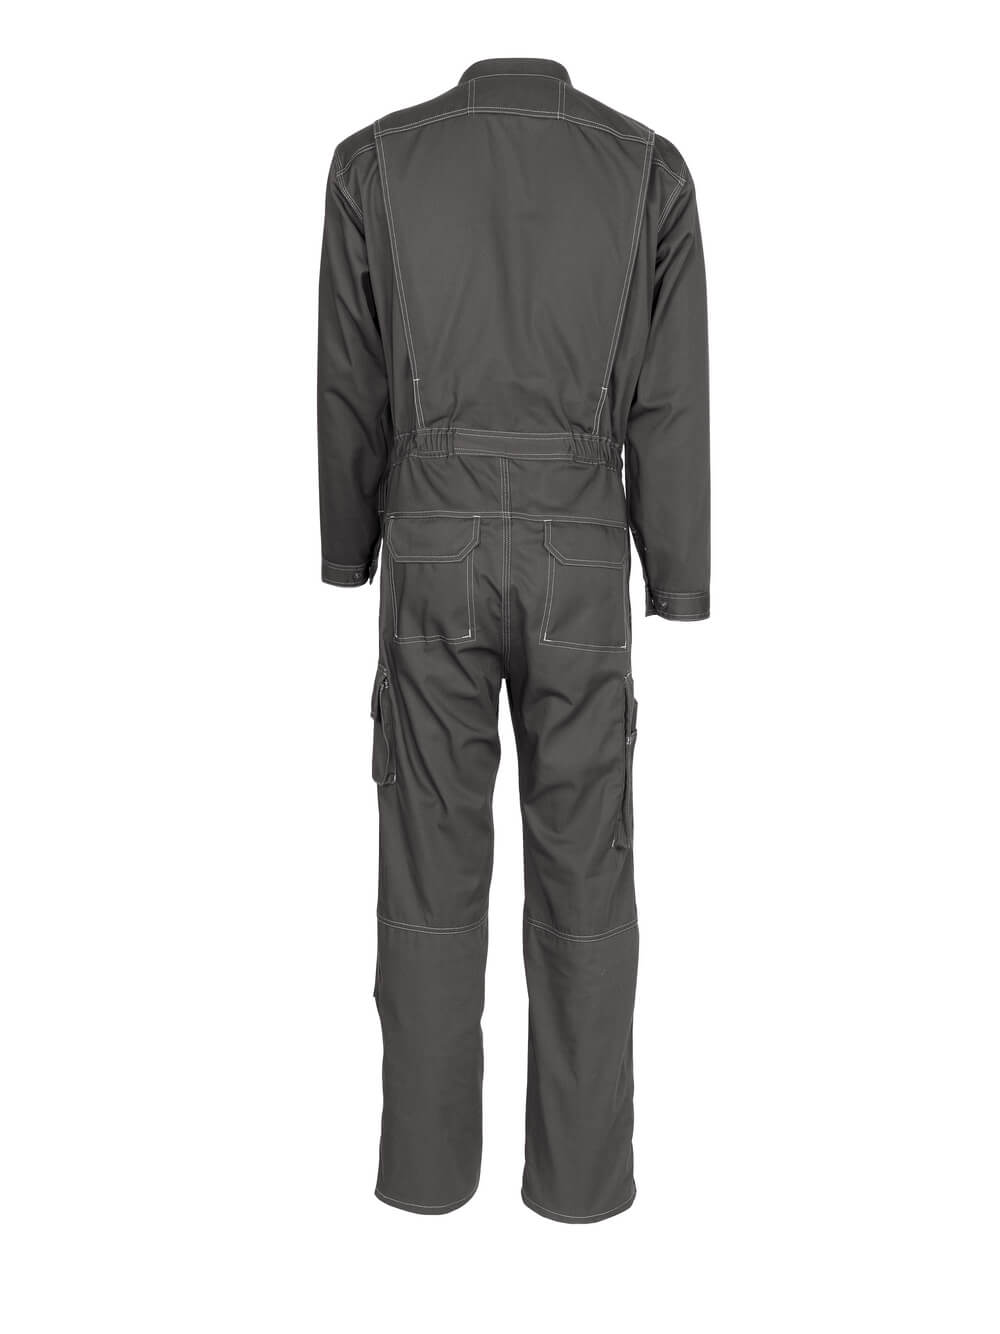 Mascot INDUSTRY  Akron Boilersuit with kneepad pockets 10519 dark anthracite